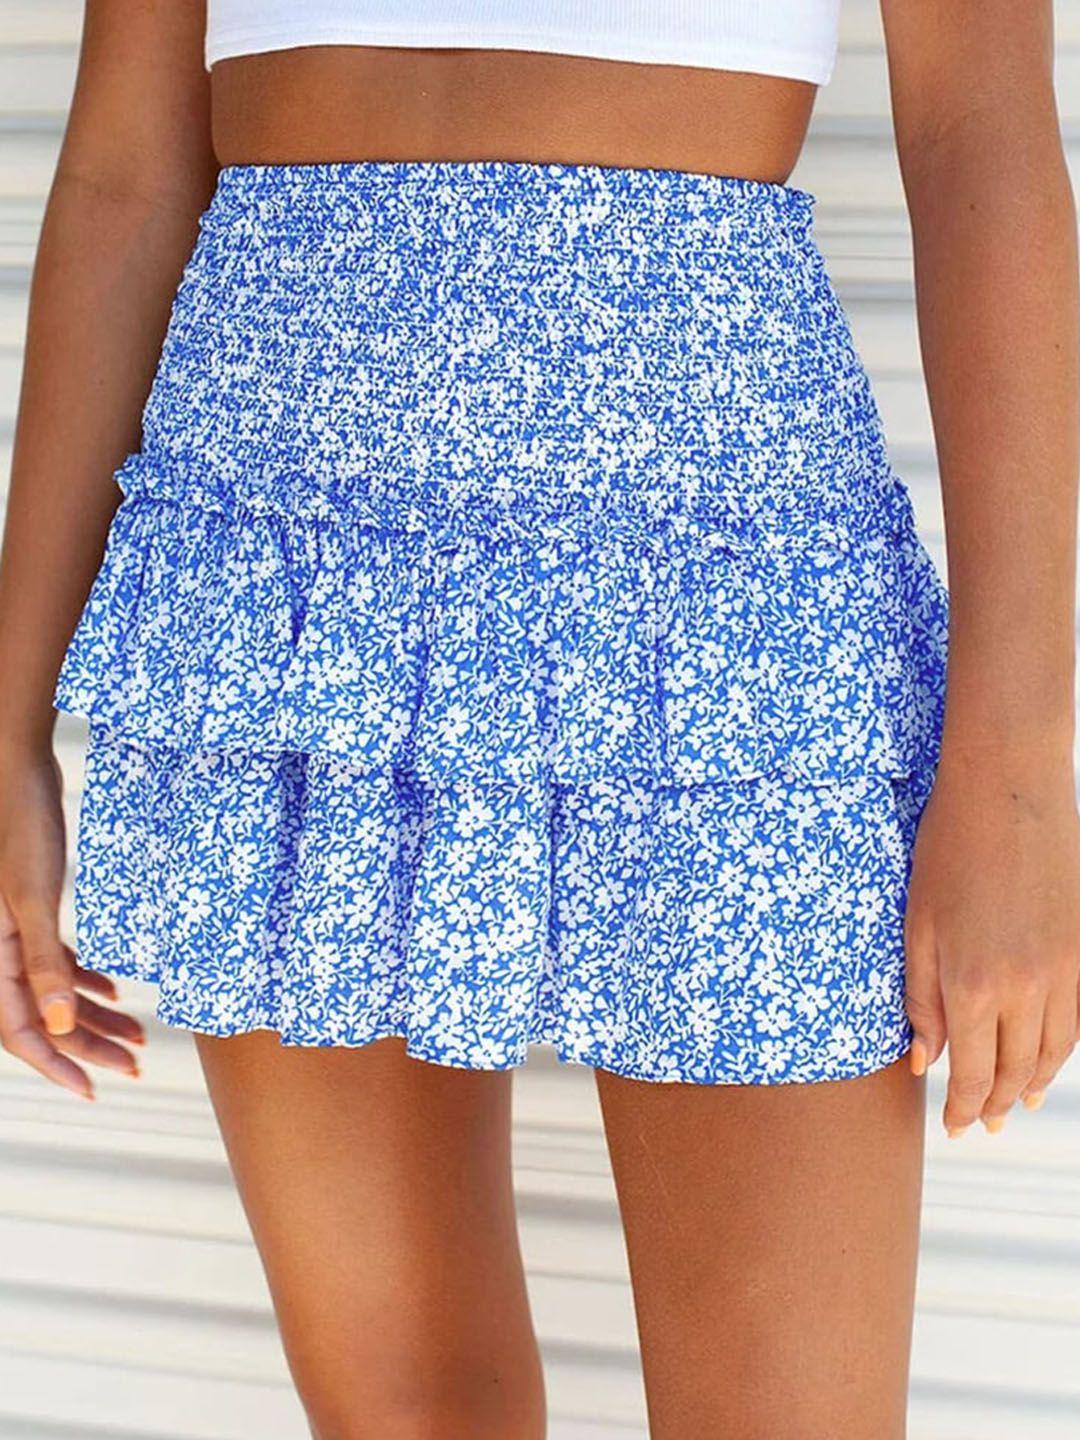 stylecast blue floral printed smocked layered flared mini skirt